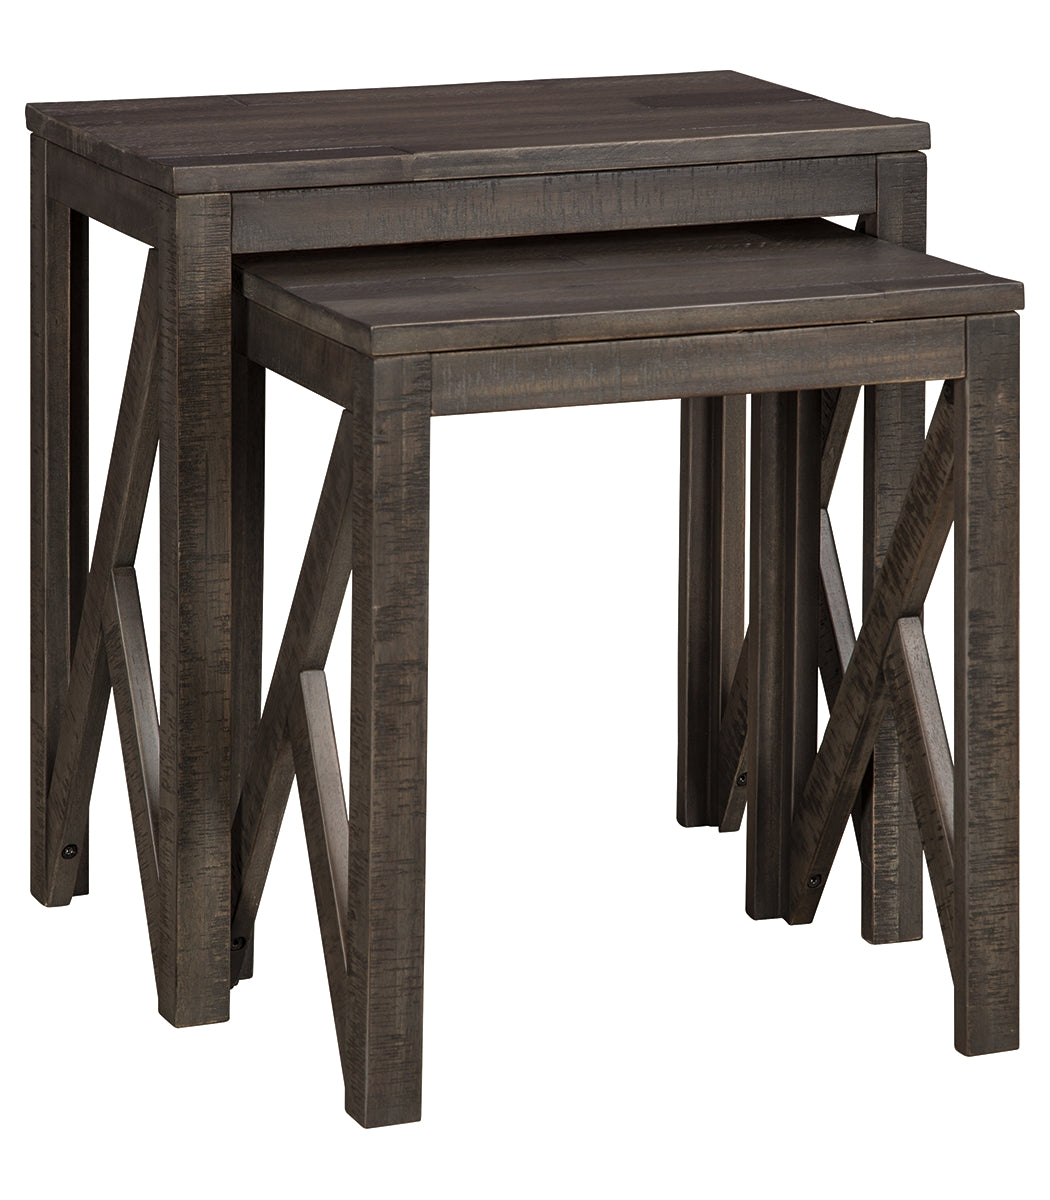 Emerdale Accent Table (Set of 2)